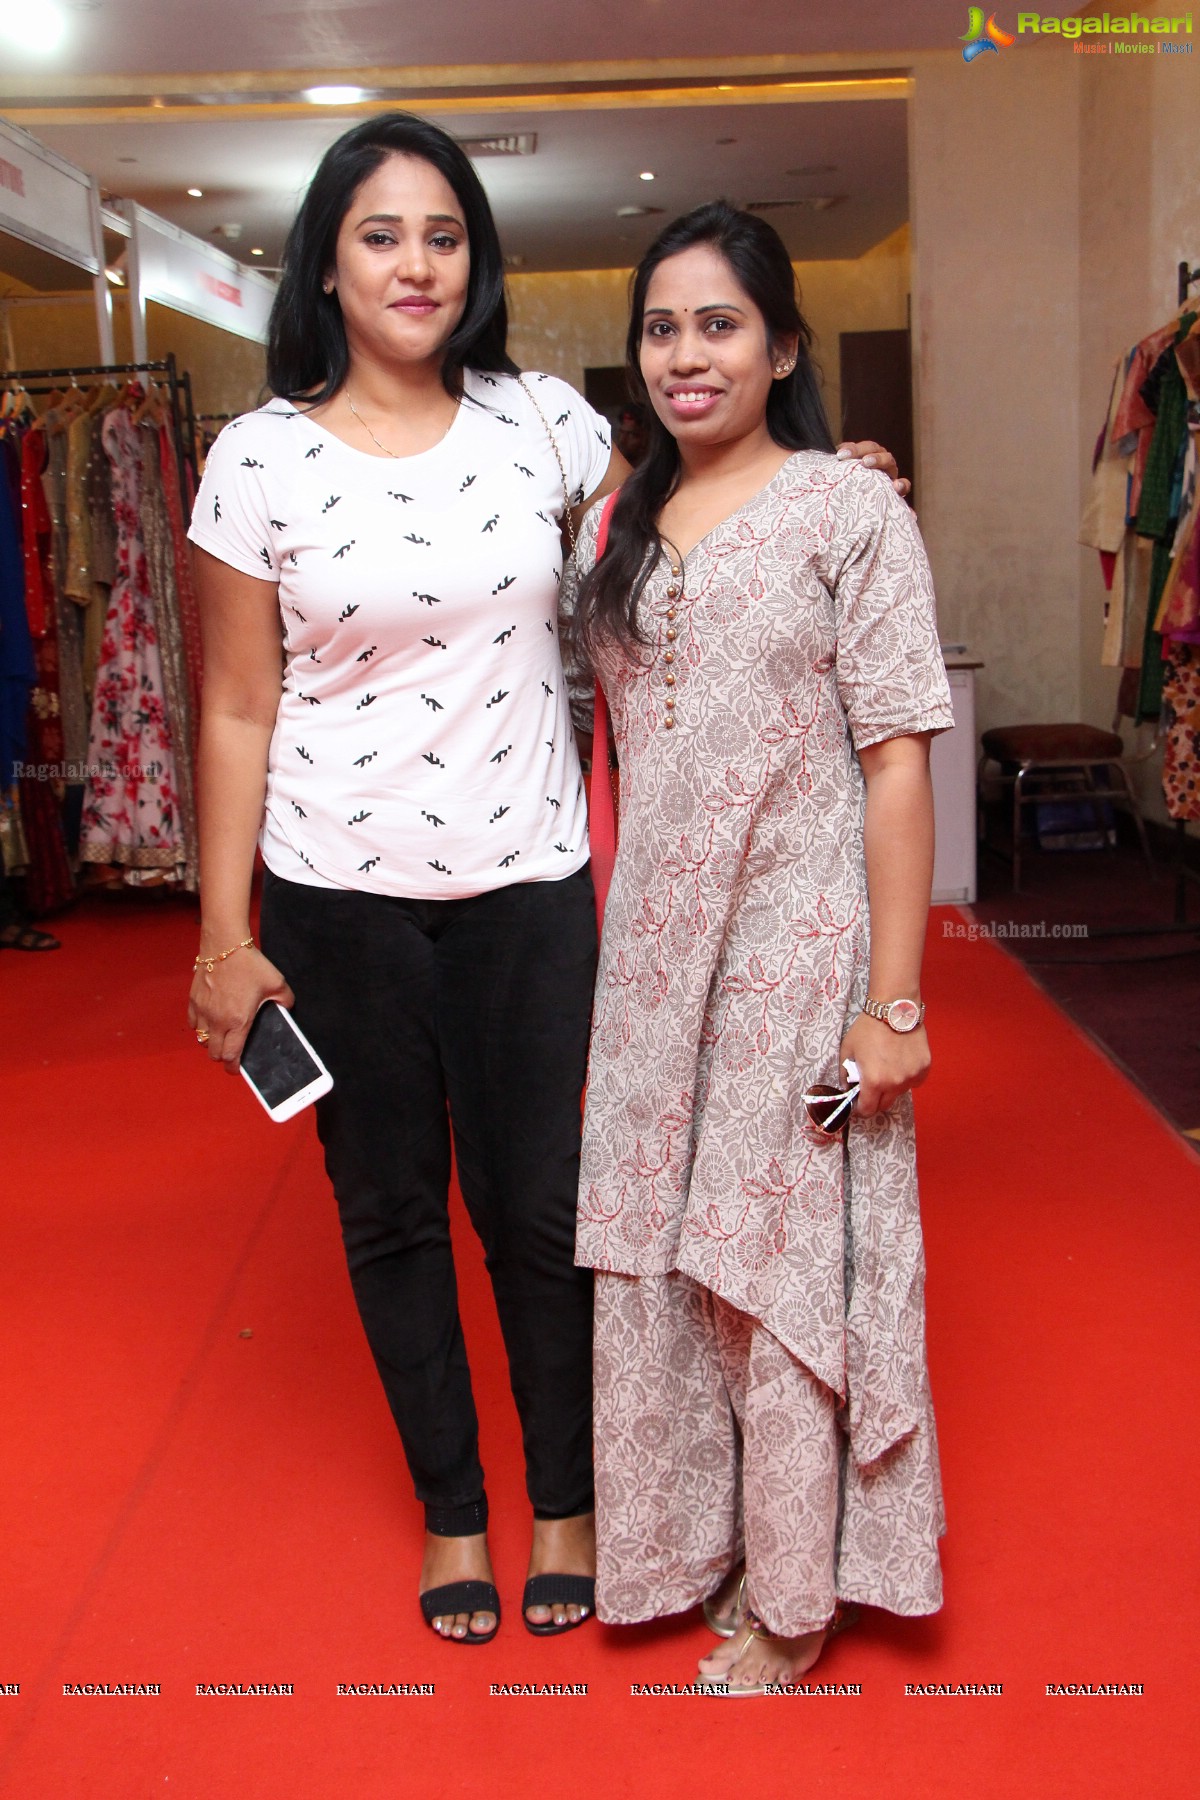 The Day & Night Bazaar by Akritti Elite at The Park, Hyderabad